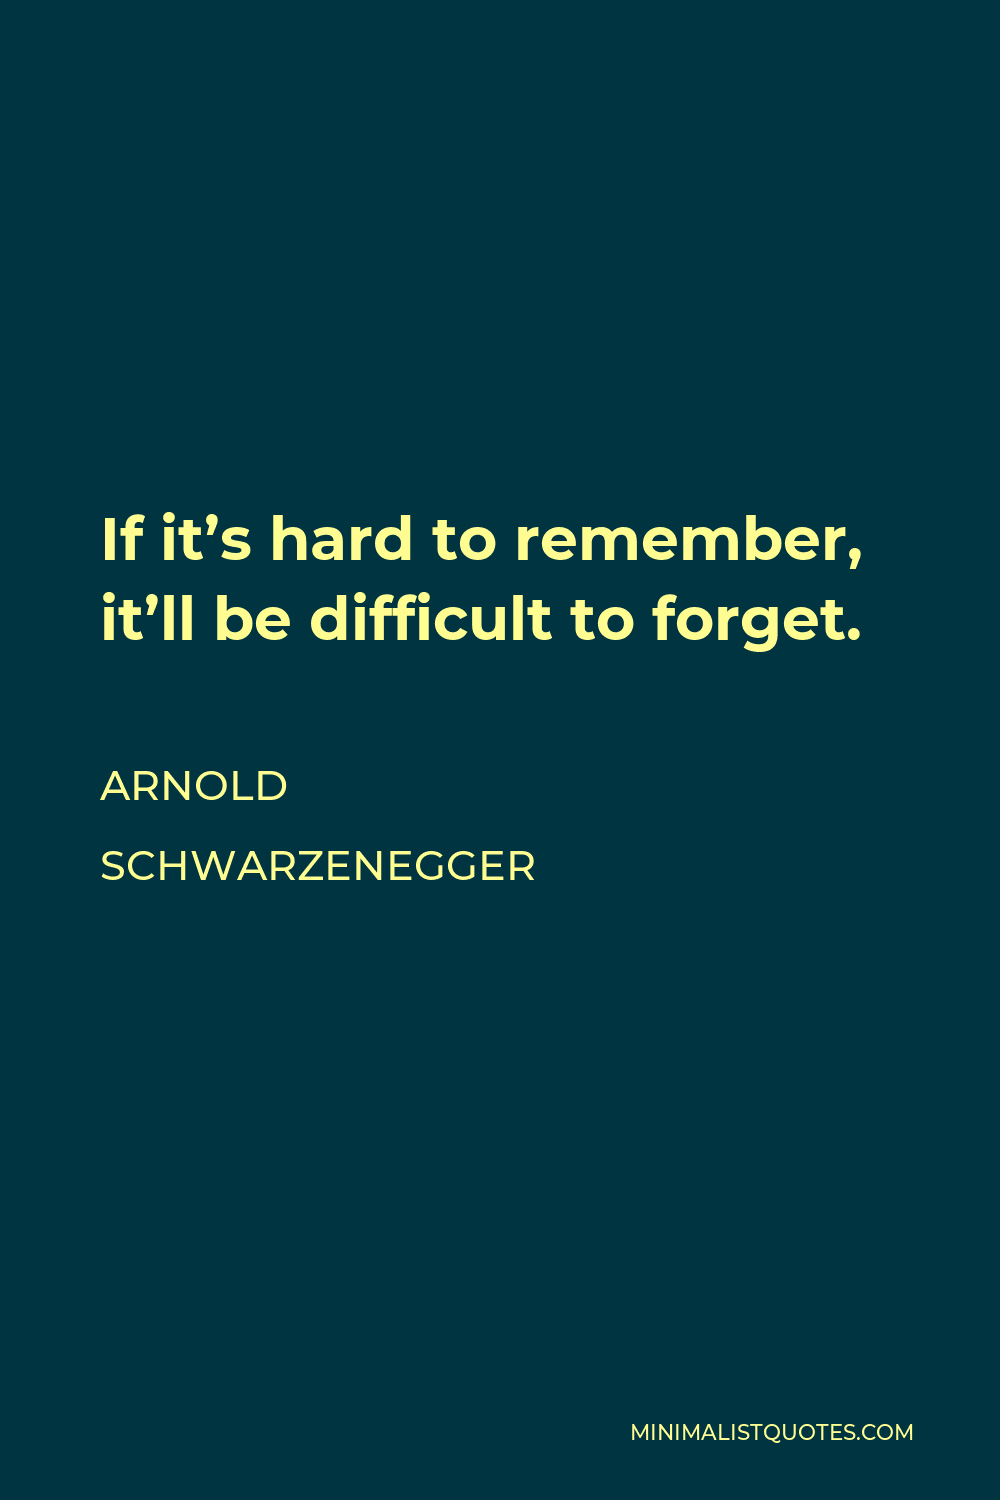 Arnold Schwarzenegger Quote - If it’s hard to remember, it’ll be difficult to forget.